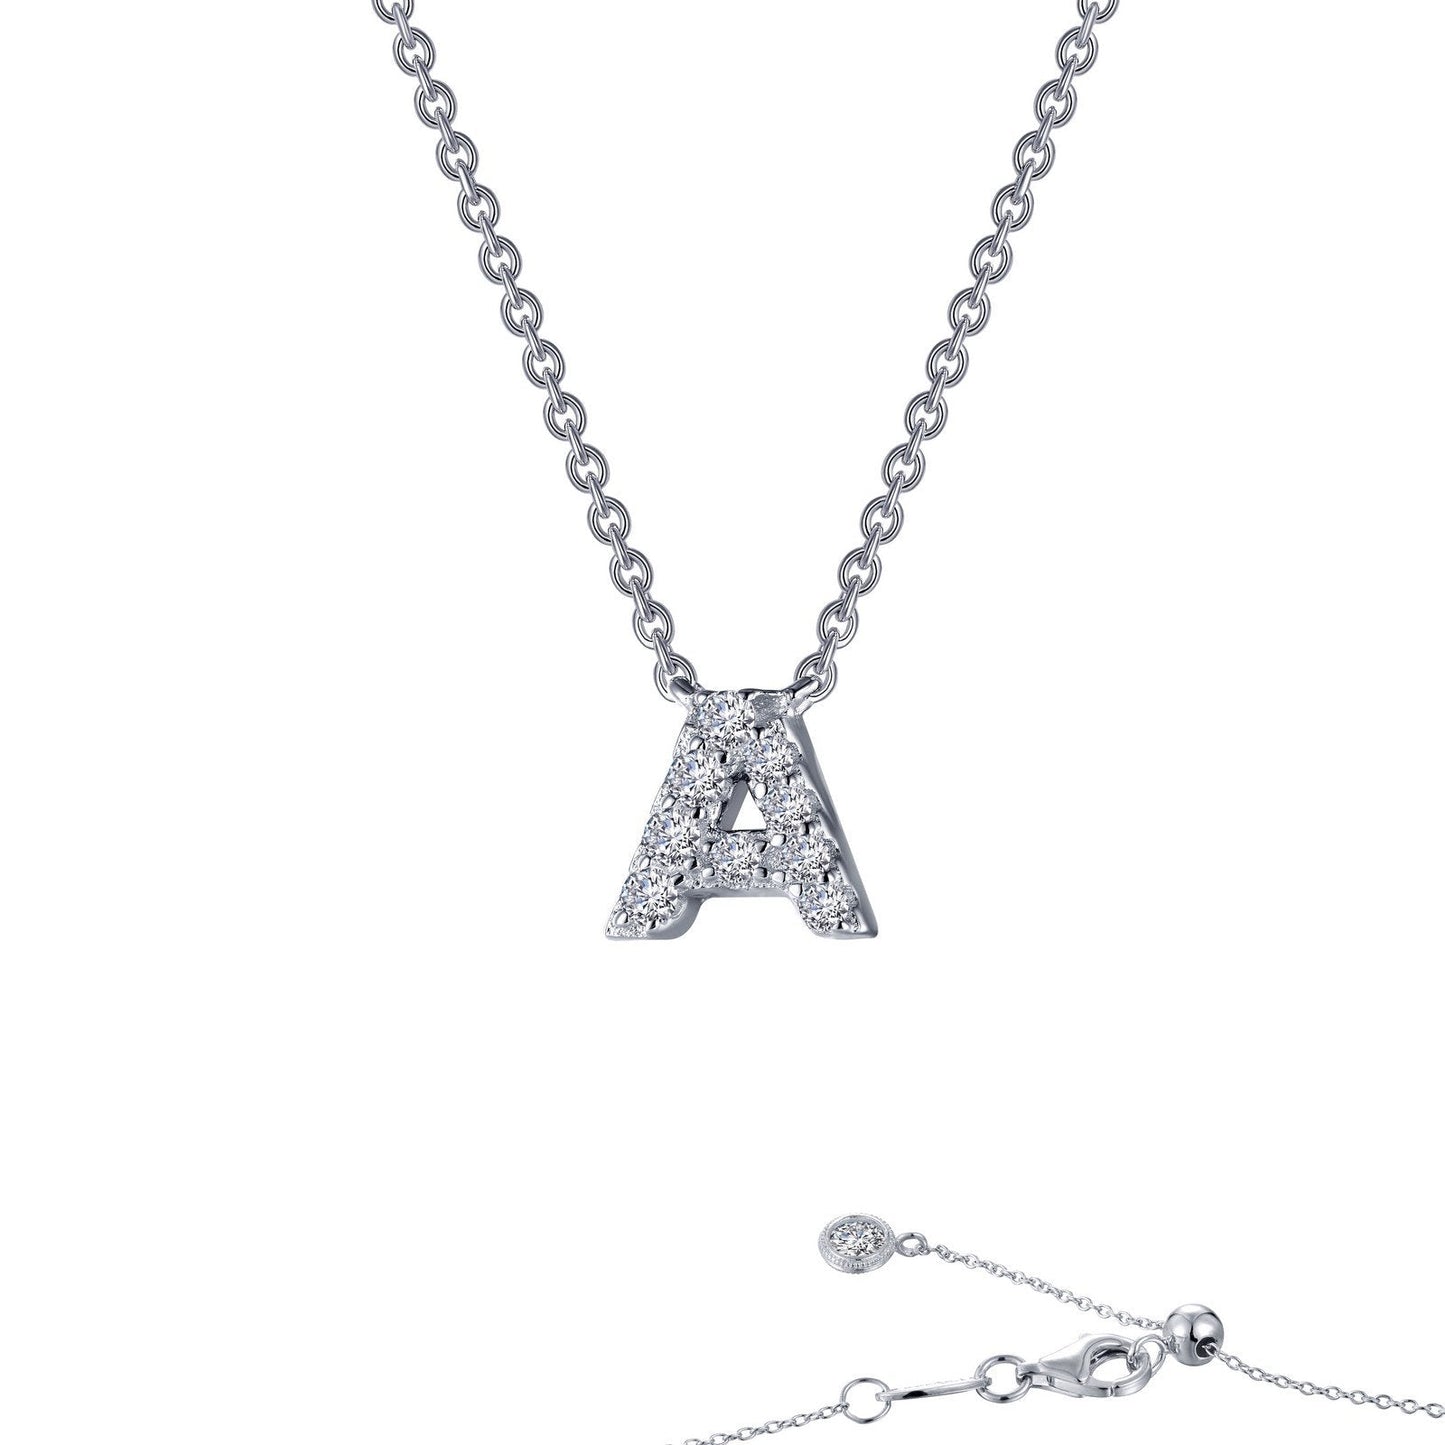 Load image into Gallery viewer, Lafonn Letter A Pendant Necklace Simulated Diamond NECKLACES Platinum 0.36 CTS Approx. 6mm (H) x 6.5mm (W)
